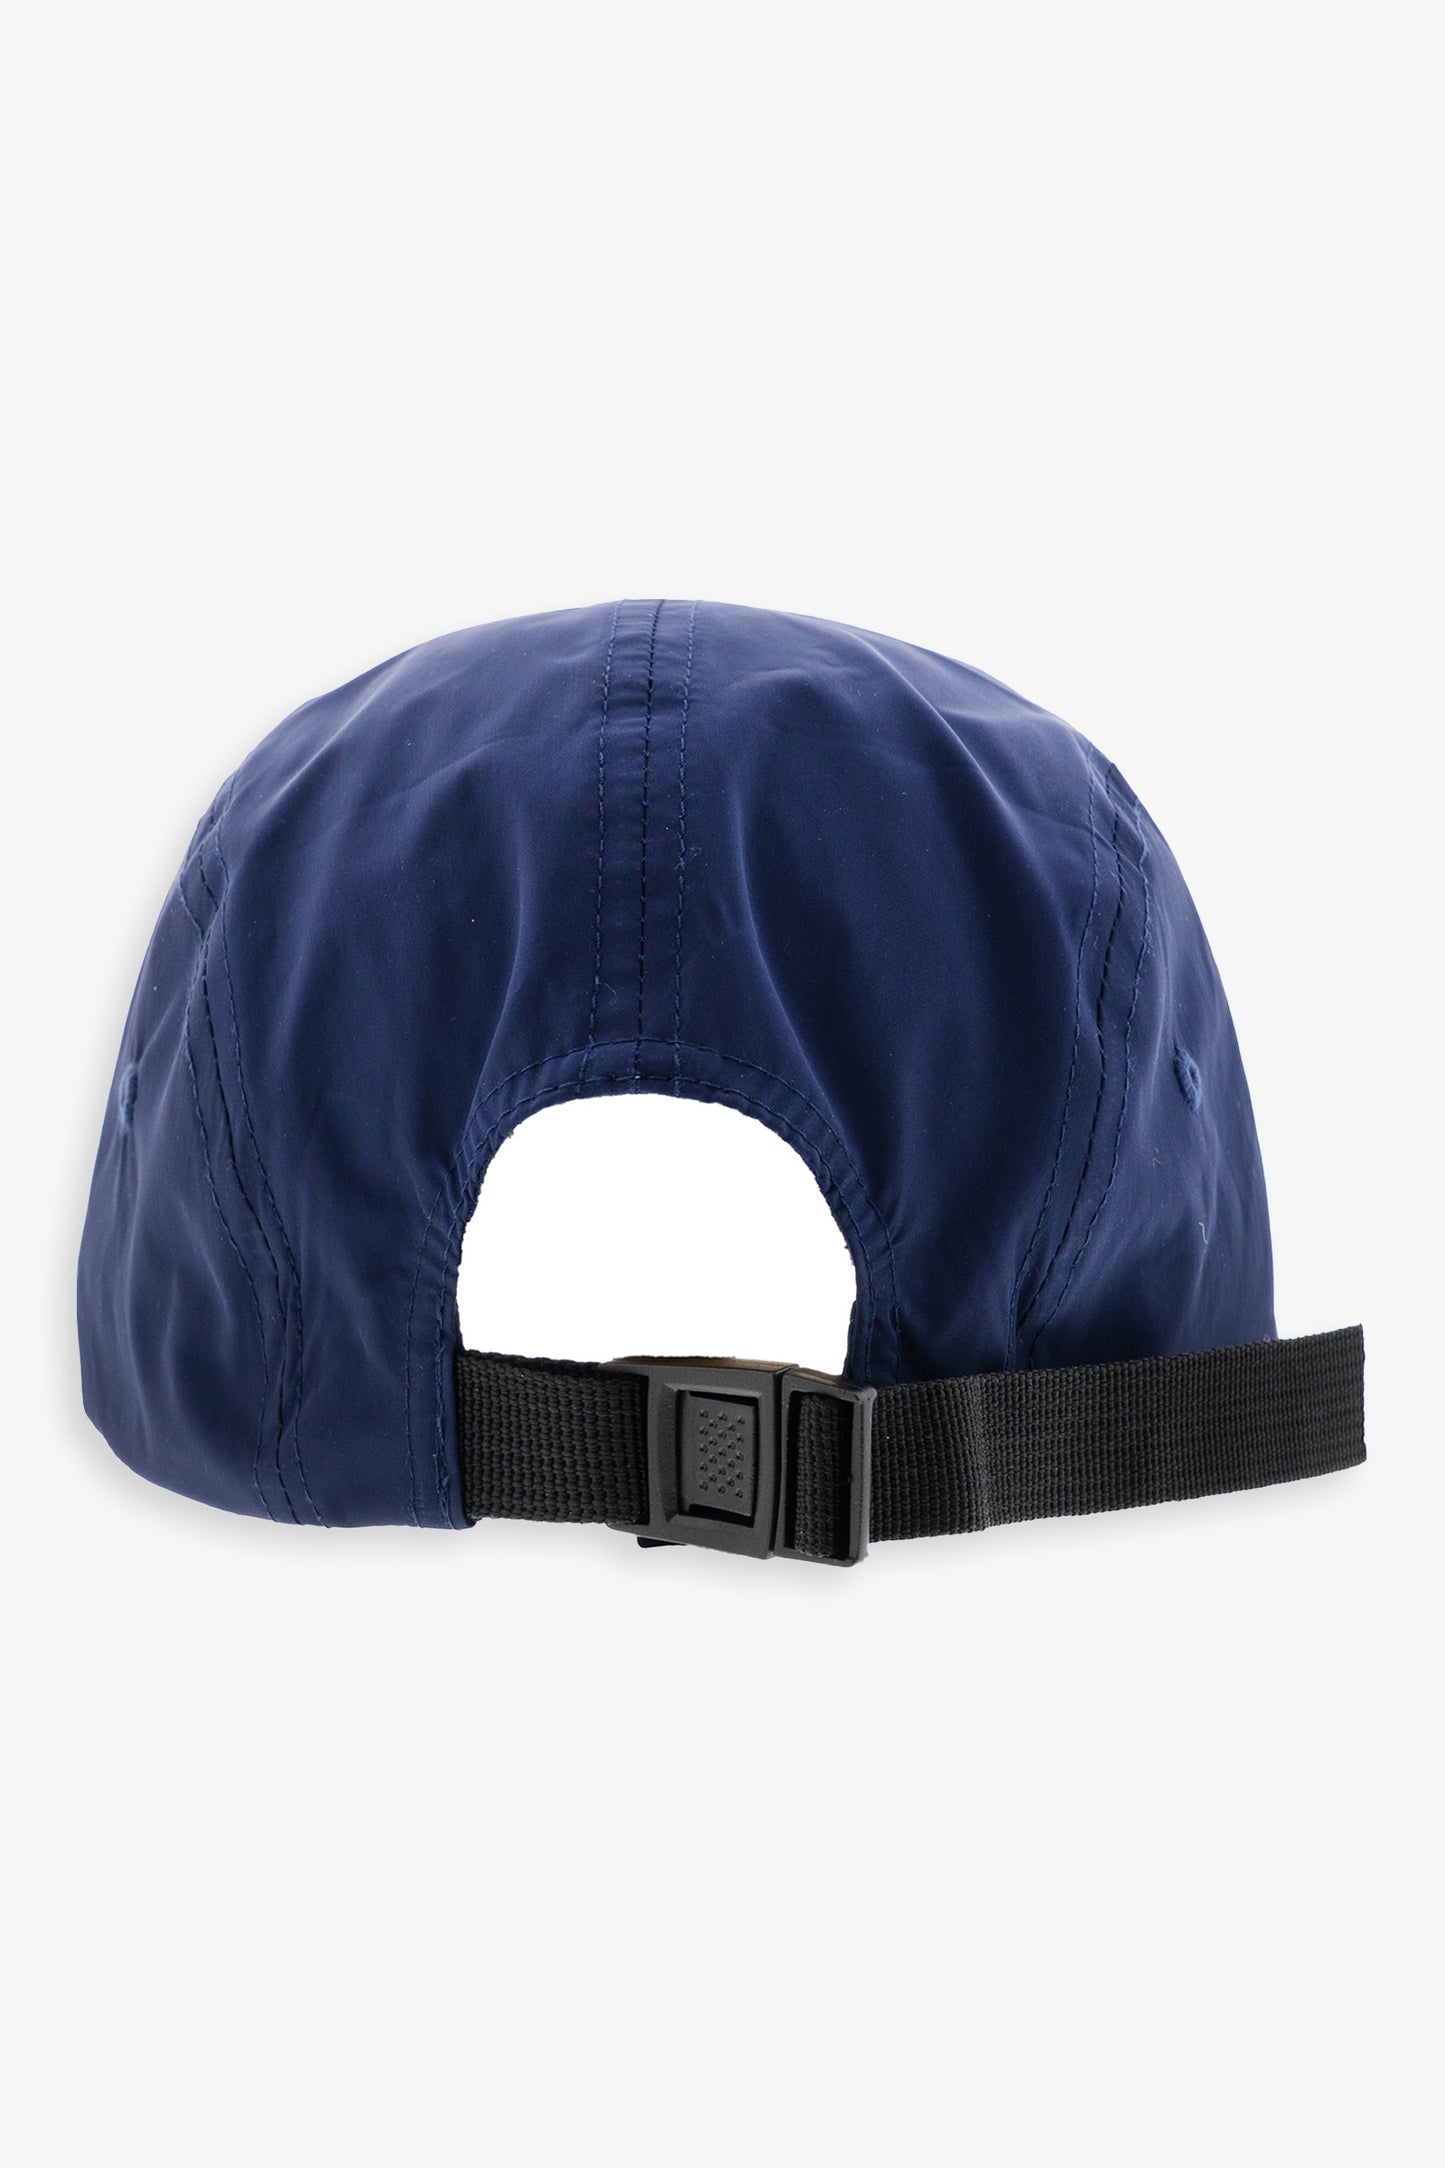 Adult Camper Hat With Waterproof Outer Shell